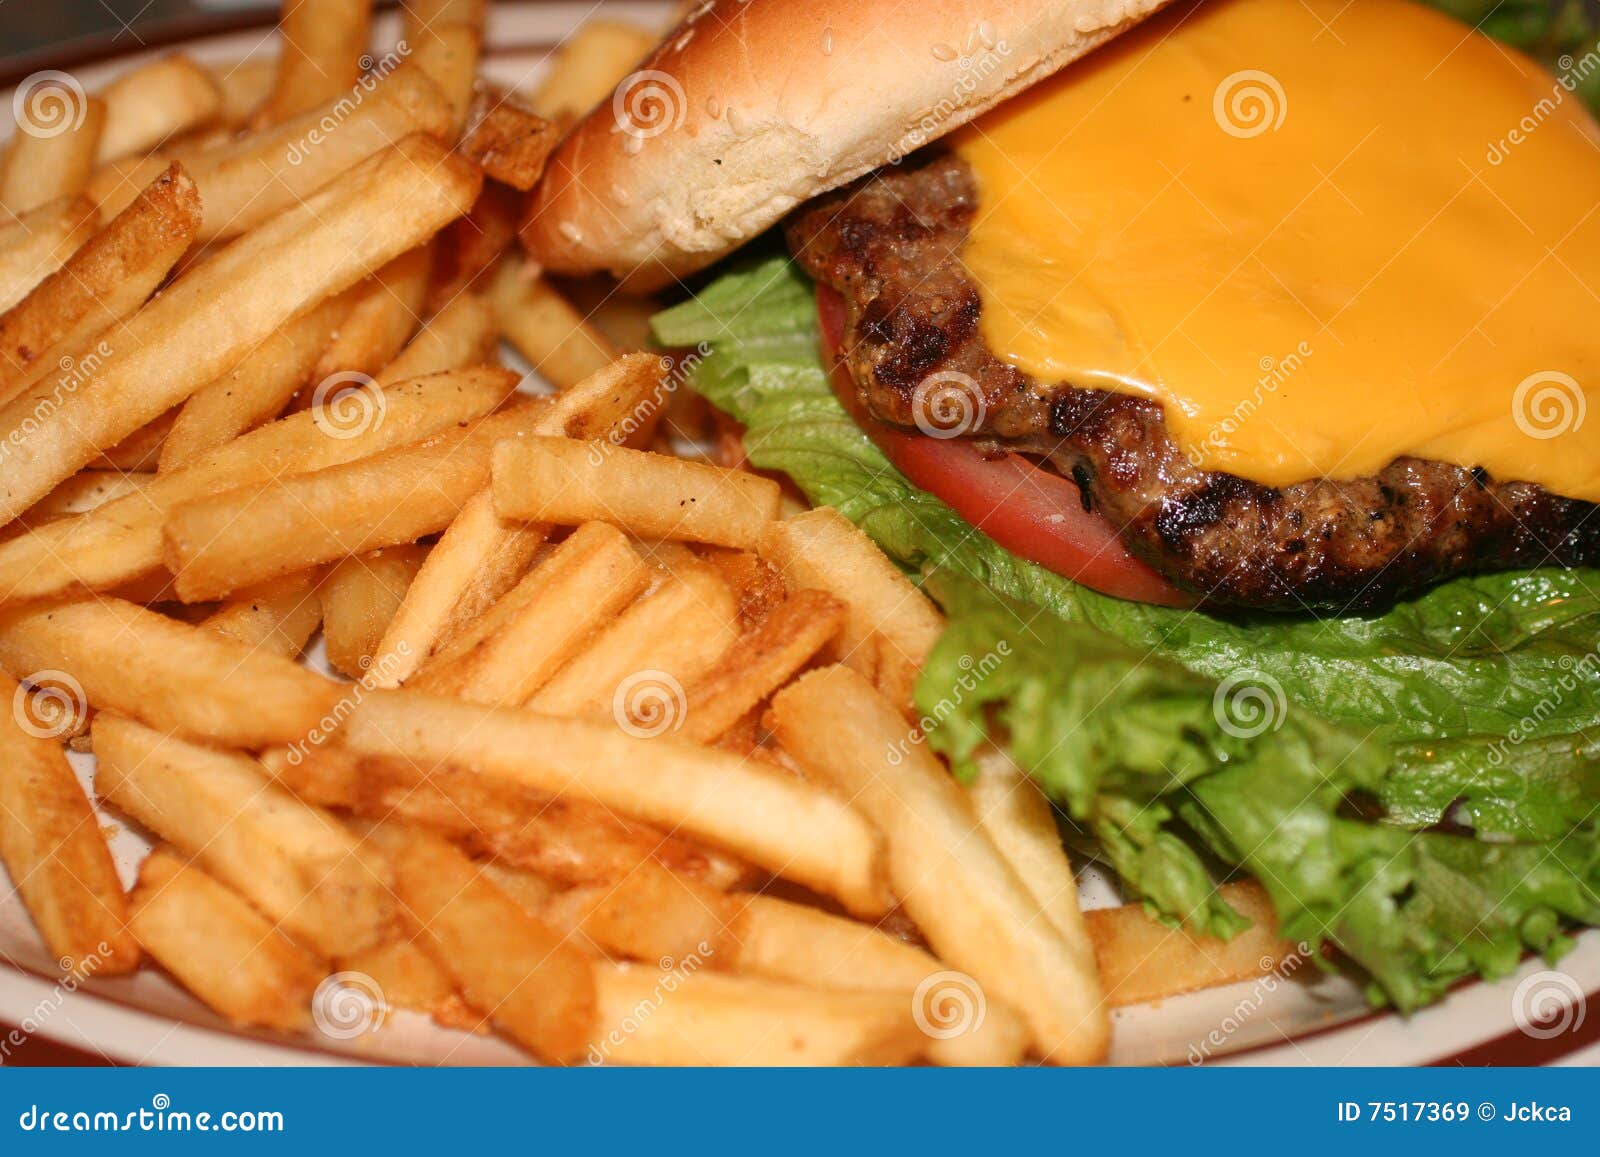 cheeseburger with fries